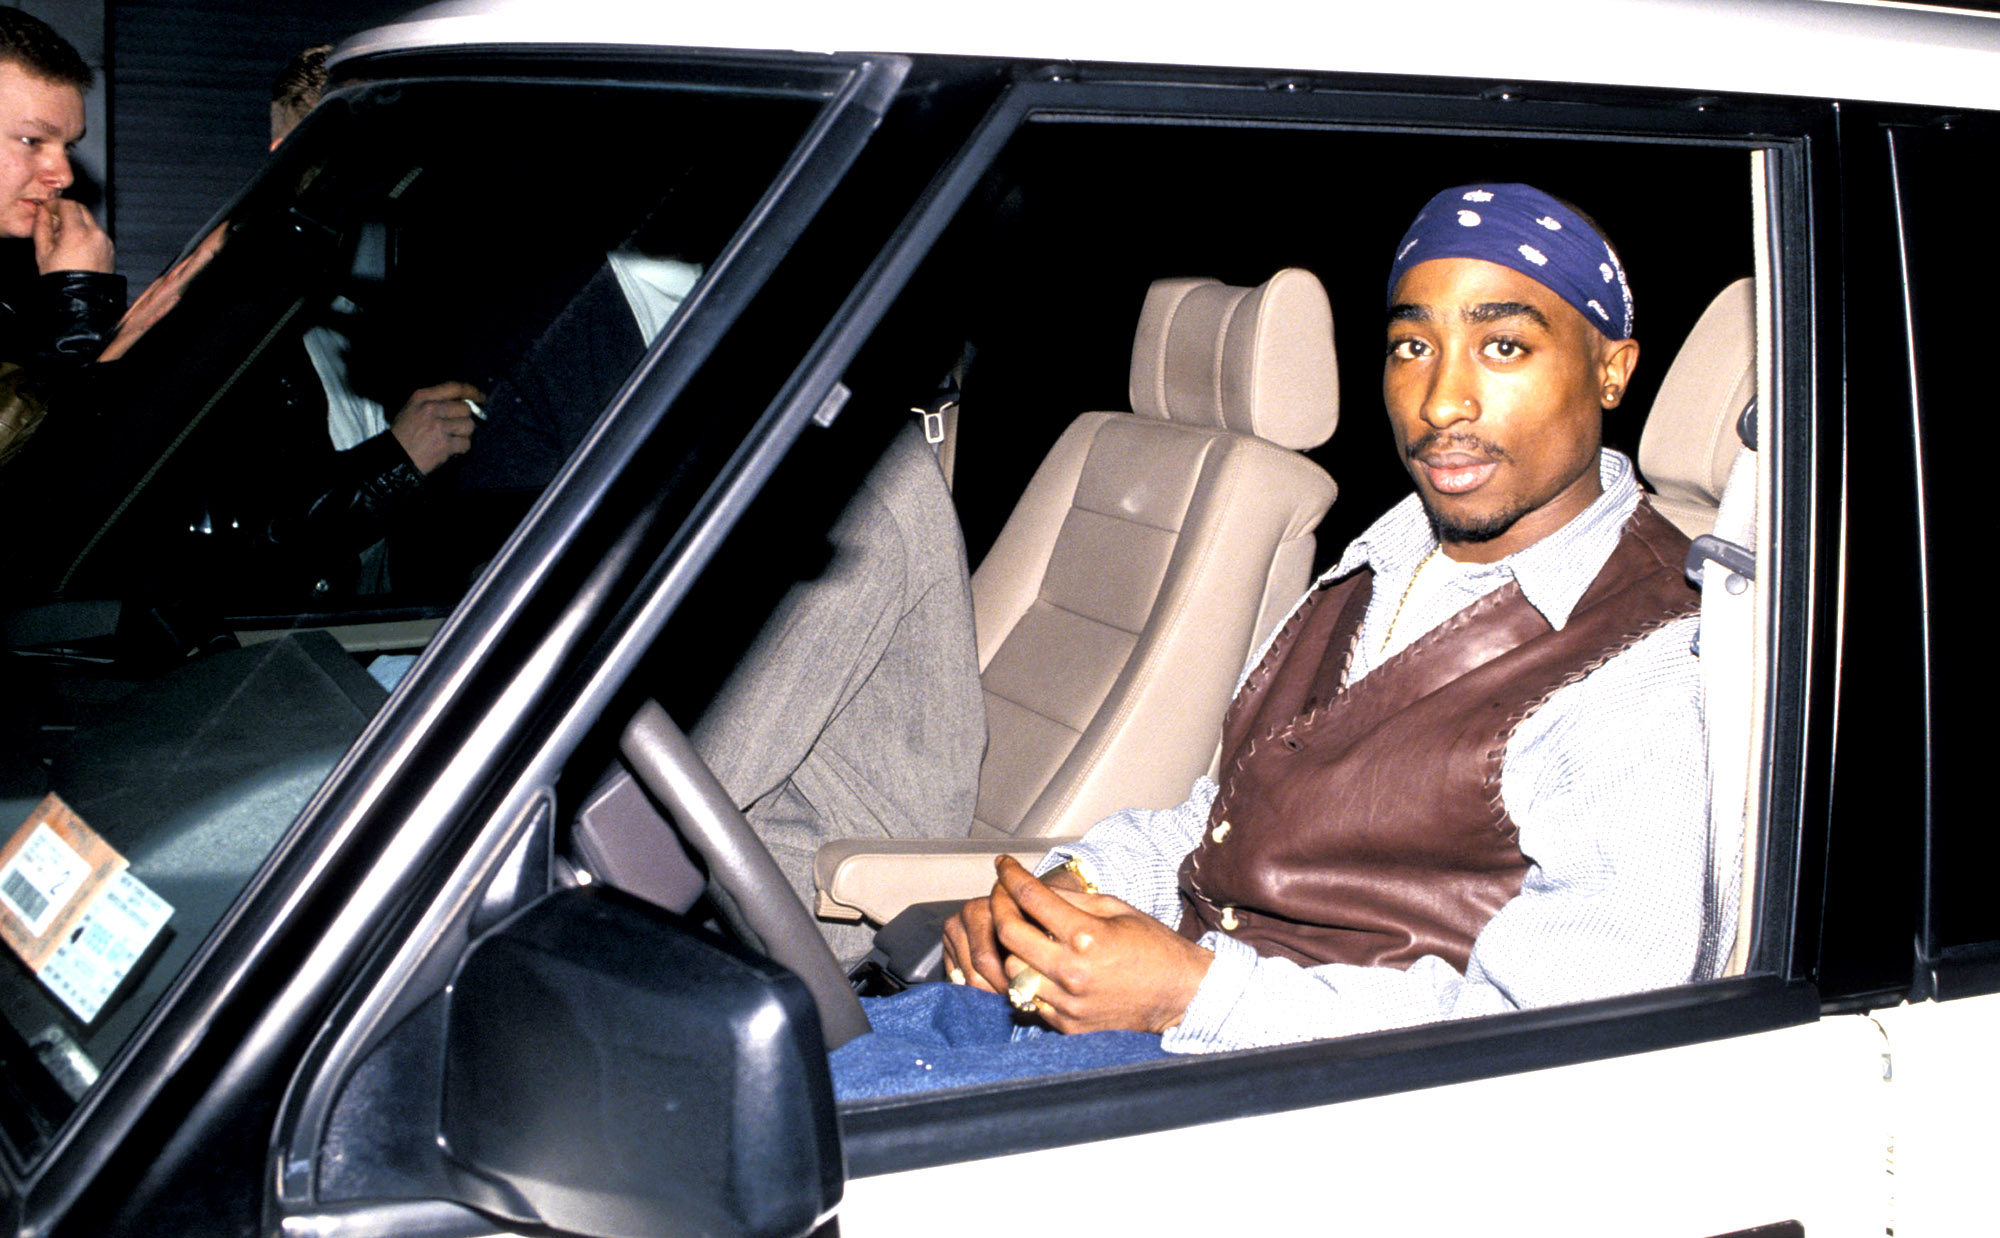 Gruesome 2Pac Autopsy Photo is Real